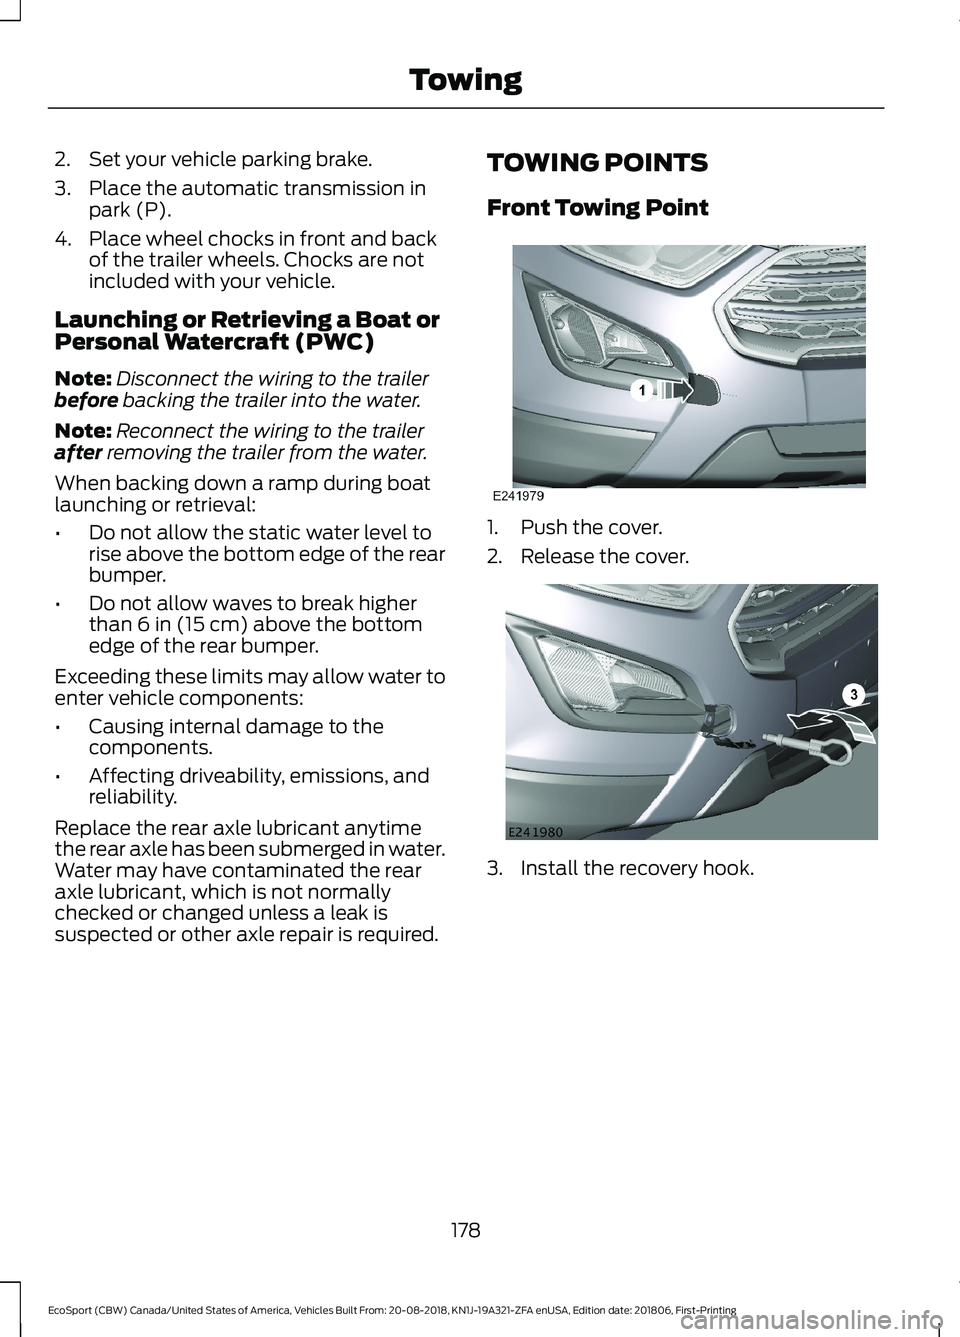 FORD ECOSPORT 2019  Owners Manual 2.Set your vehicle parking brake.
3.Place the automatic transmission inpark (P).
4.Place wheel chocks in front and backof the trailer wheels. Chocks are notincluded with your vehicle.
Launching or Ret